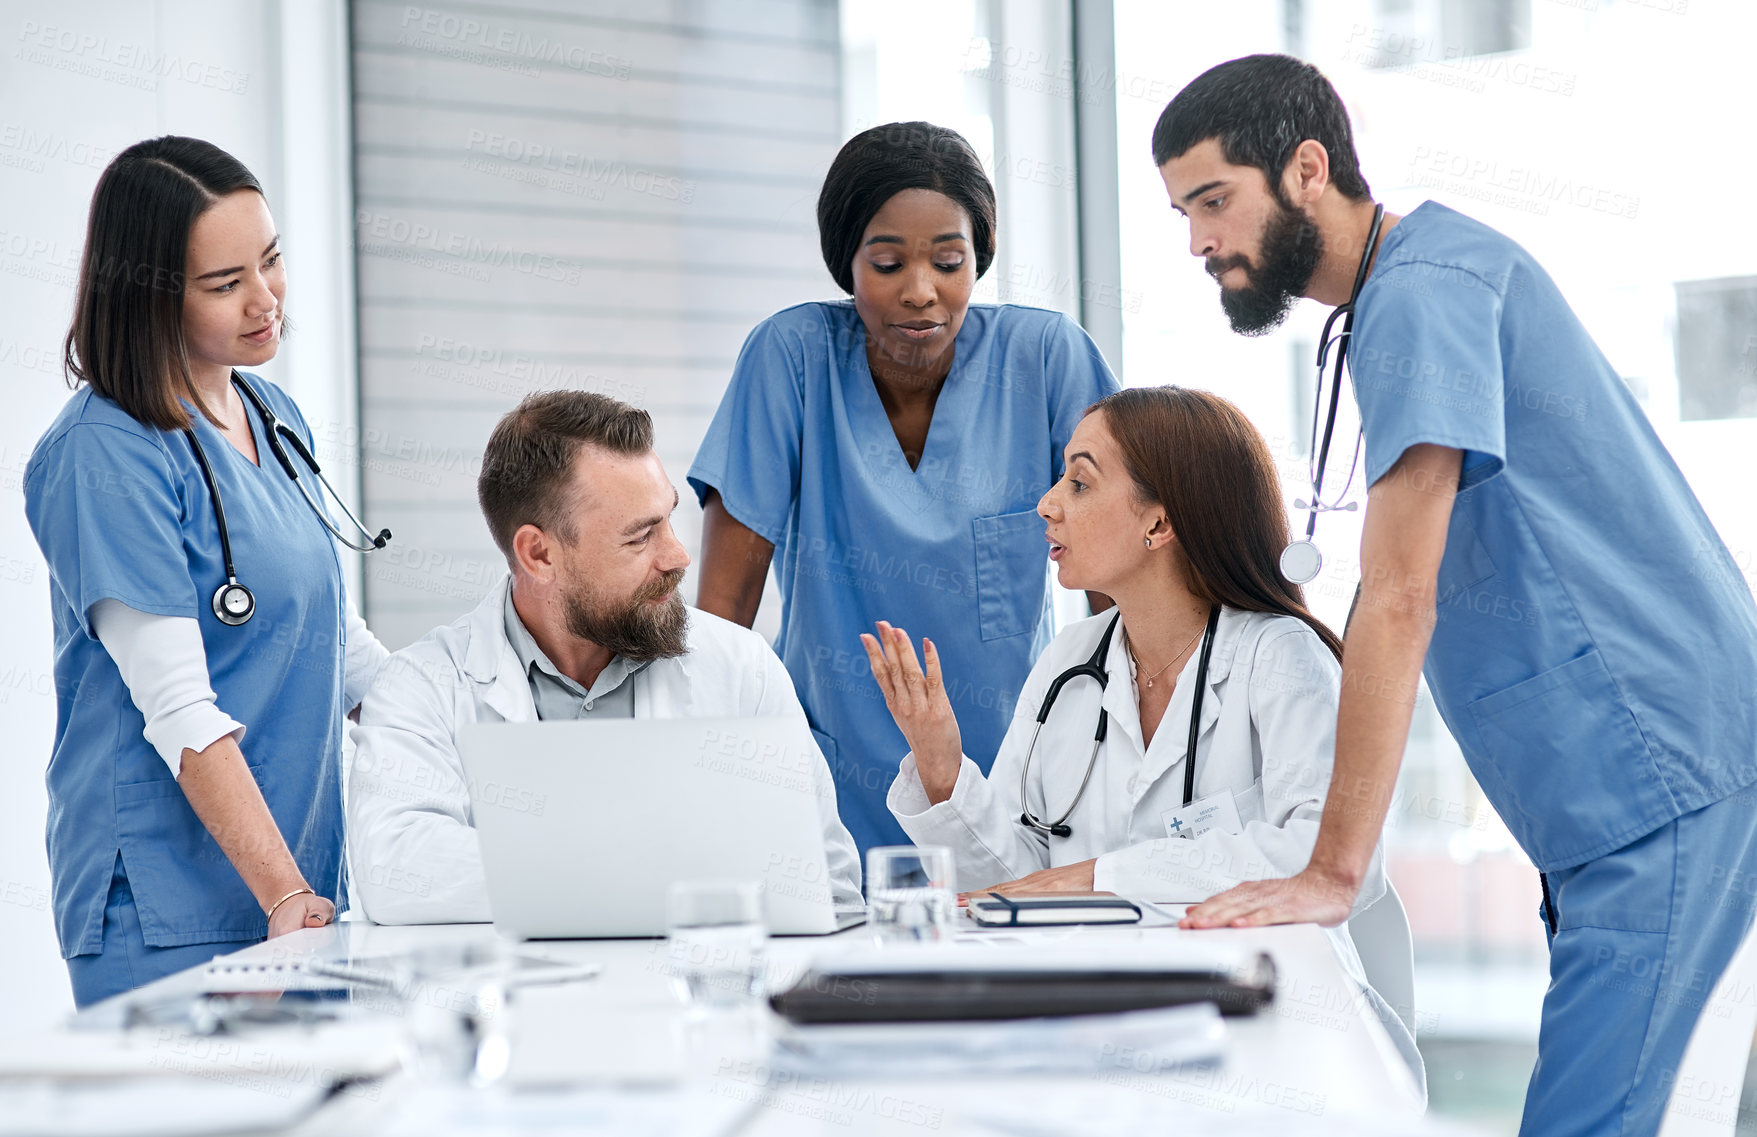 Buy stock photo Shot of a group of medical practitioners having a meeting in a hospital boardroom